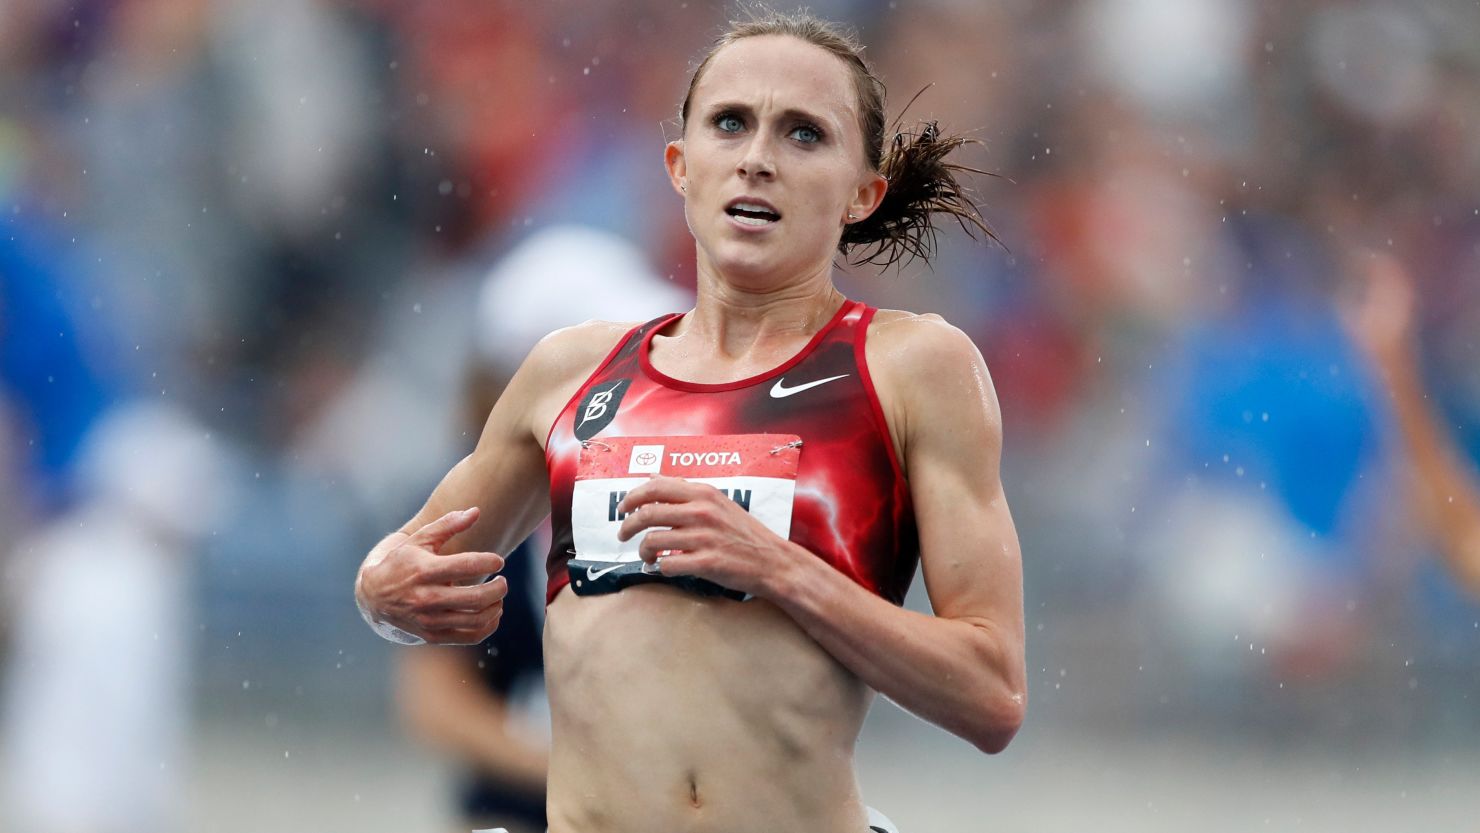 Shelby Houlihan crosses the finish line at the women's 5,000-meter run at the US Championships in Des Moines, Iowa, on July 28, 2019.